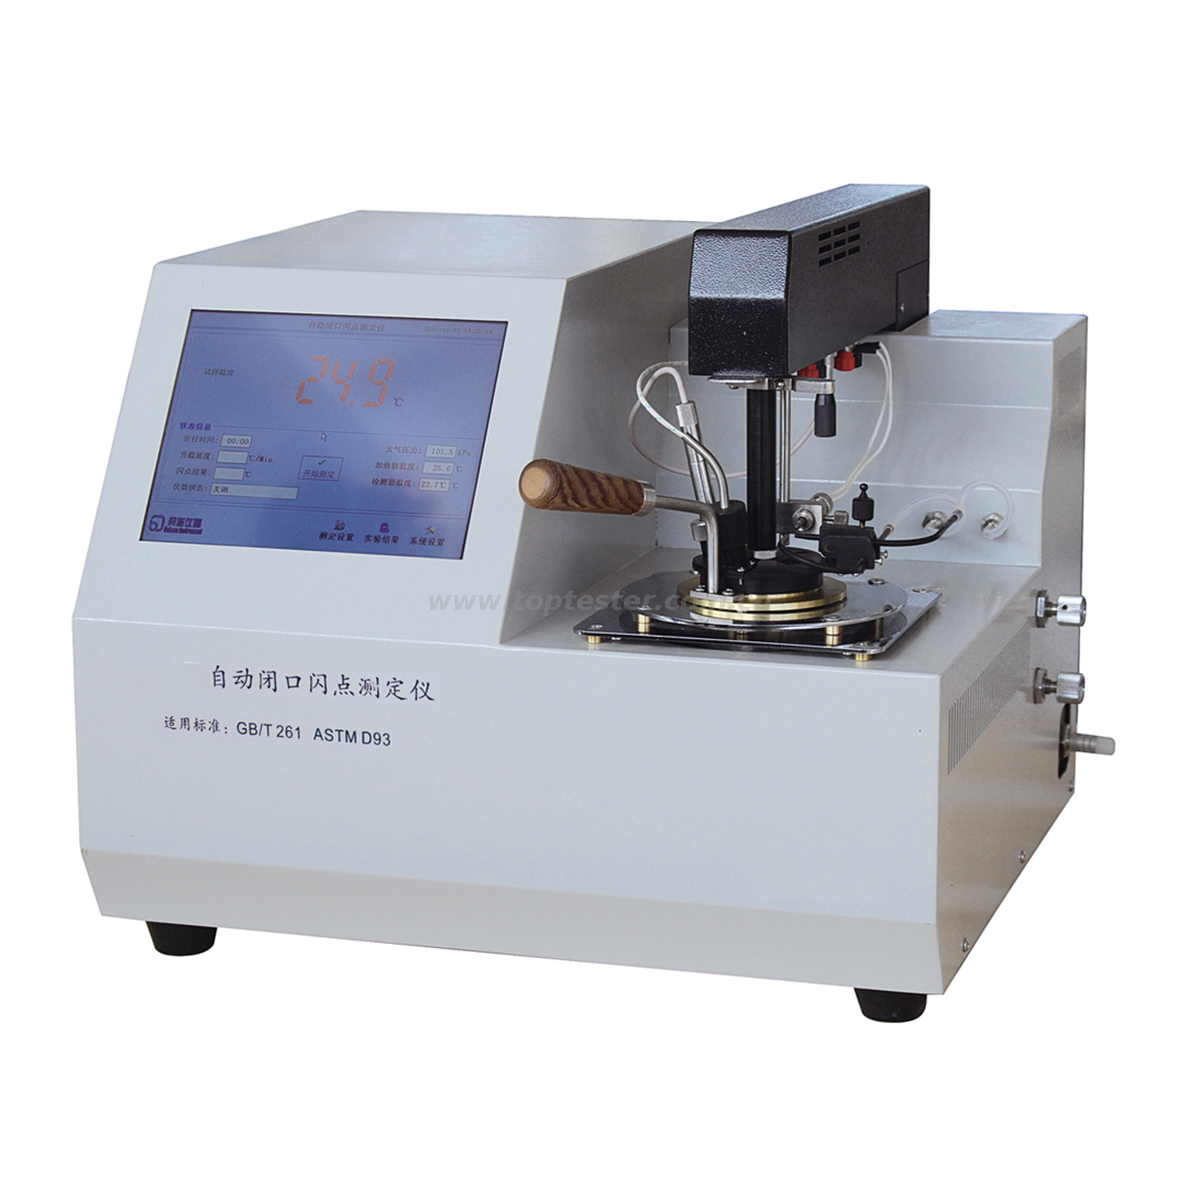 ASTM D93 Awtomatikong Closed Cup Flash Point Tester Model TPC-122A